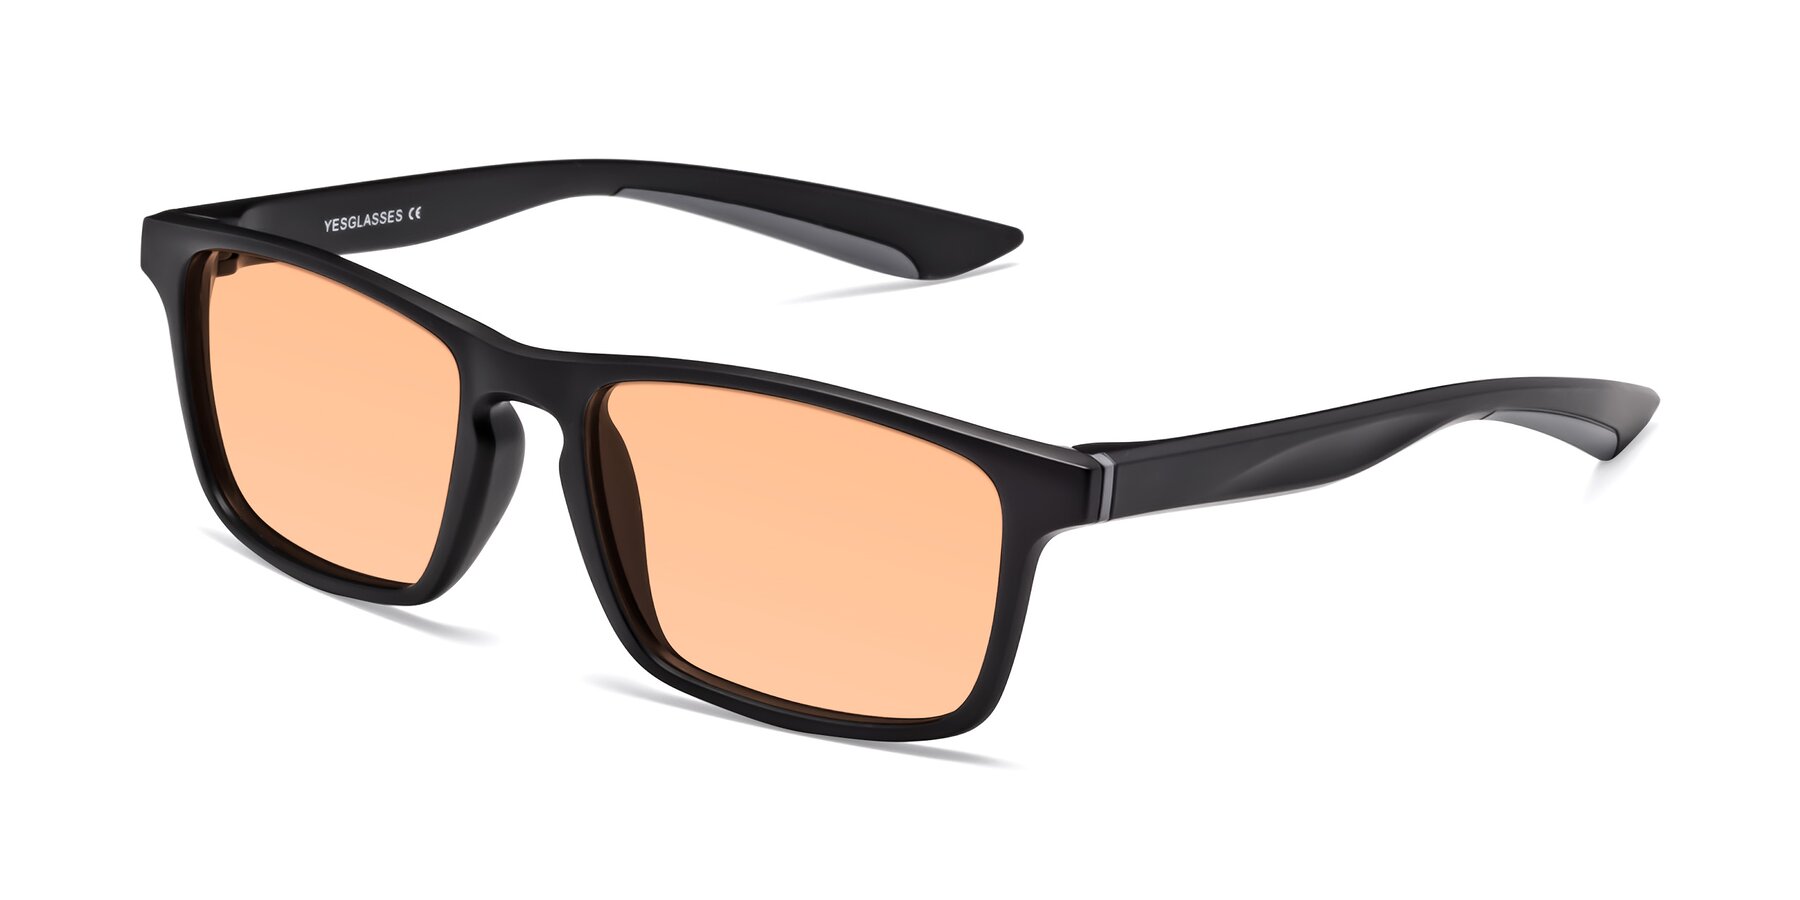 Angle of Passion in Matte Black-Gray with Light Orange Tinted Lenses